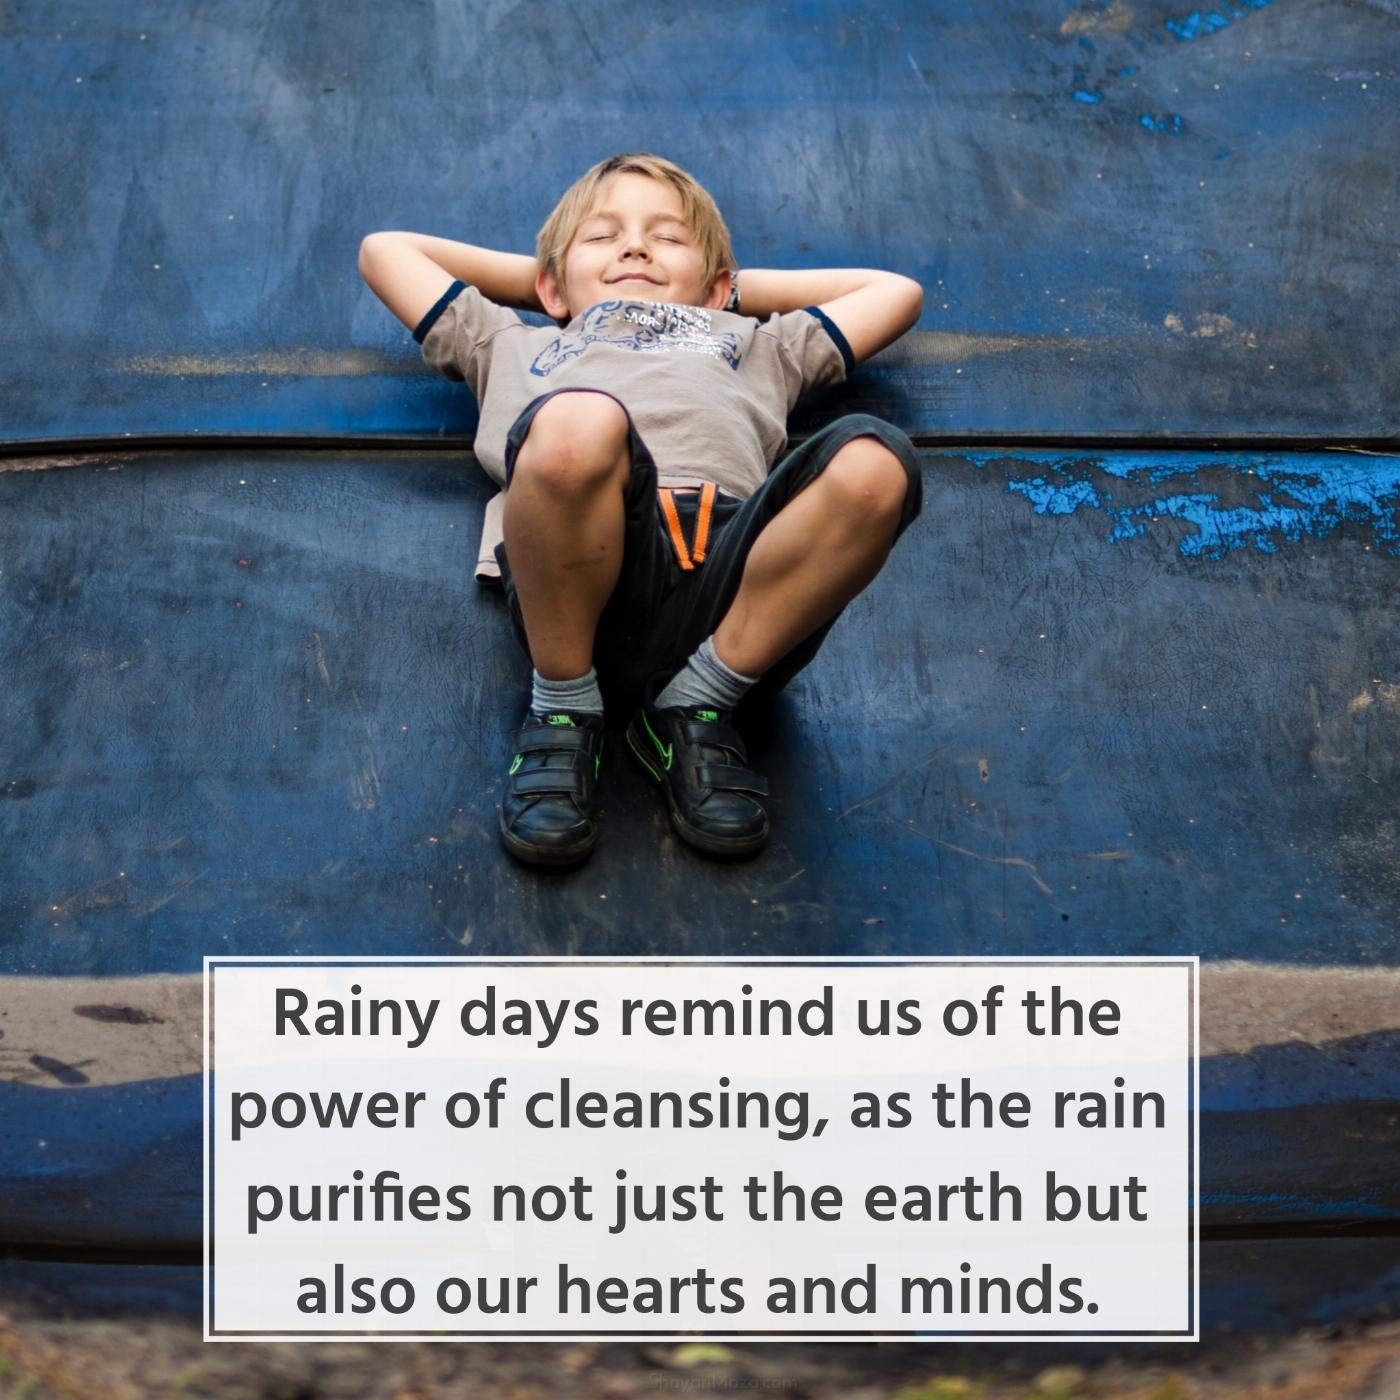 Rainy days remind us of the power of cleansing